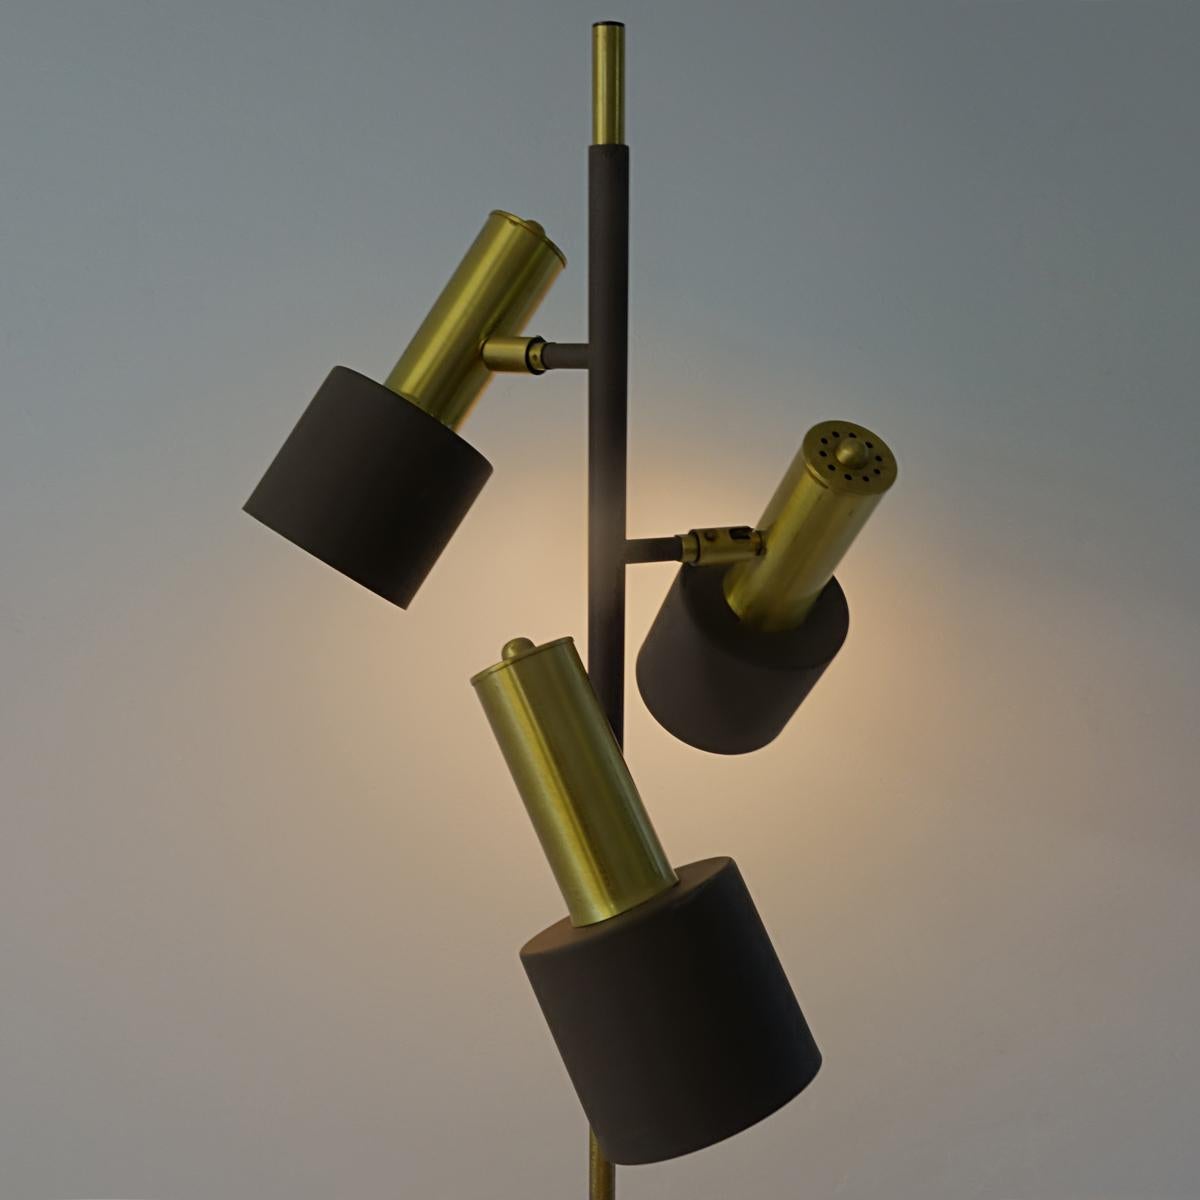 Mid-Century Modern Adjustable Floor Lamp in Brass and Brown by RAAK Amsterdam For Sale 3